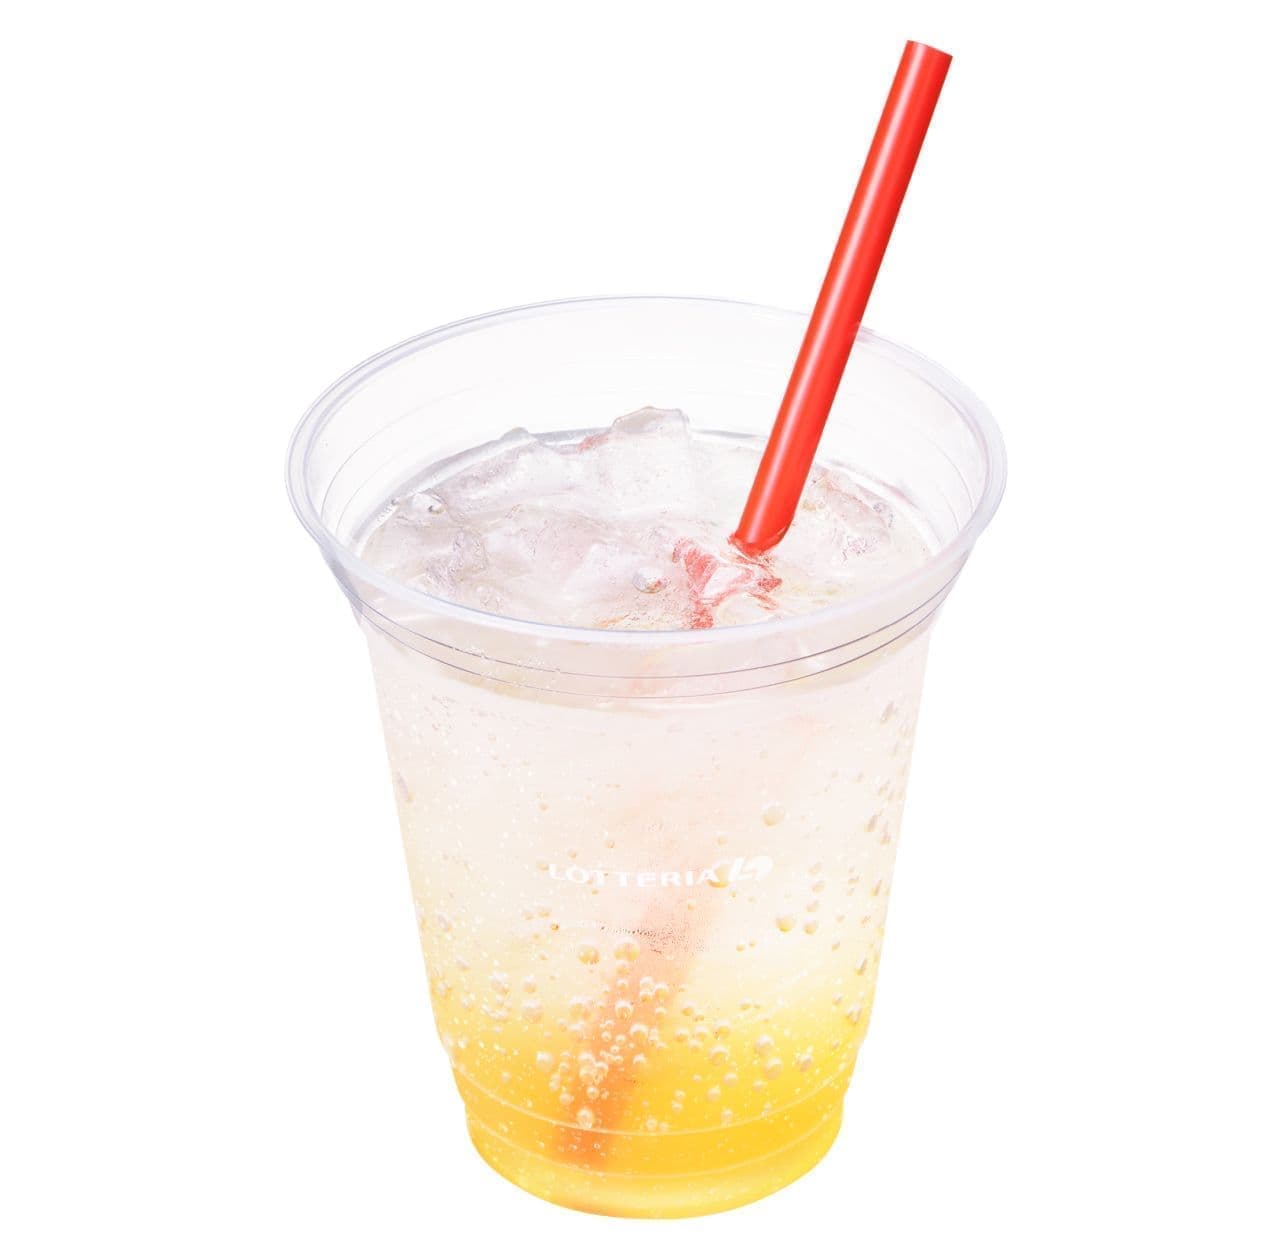 Lotteria "Seekers Sparkling (approx. 0.09% juice)